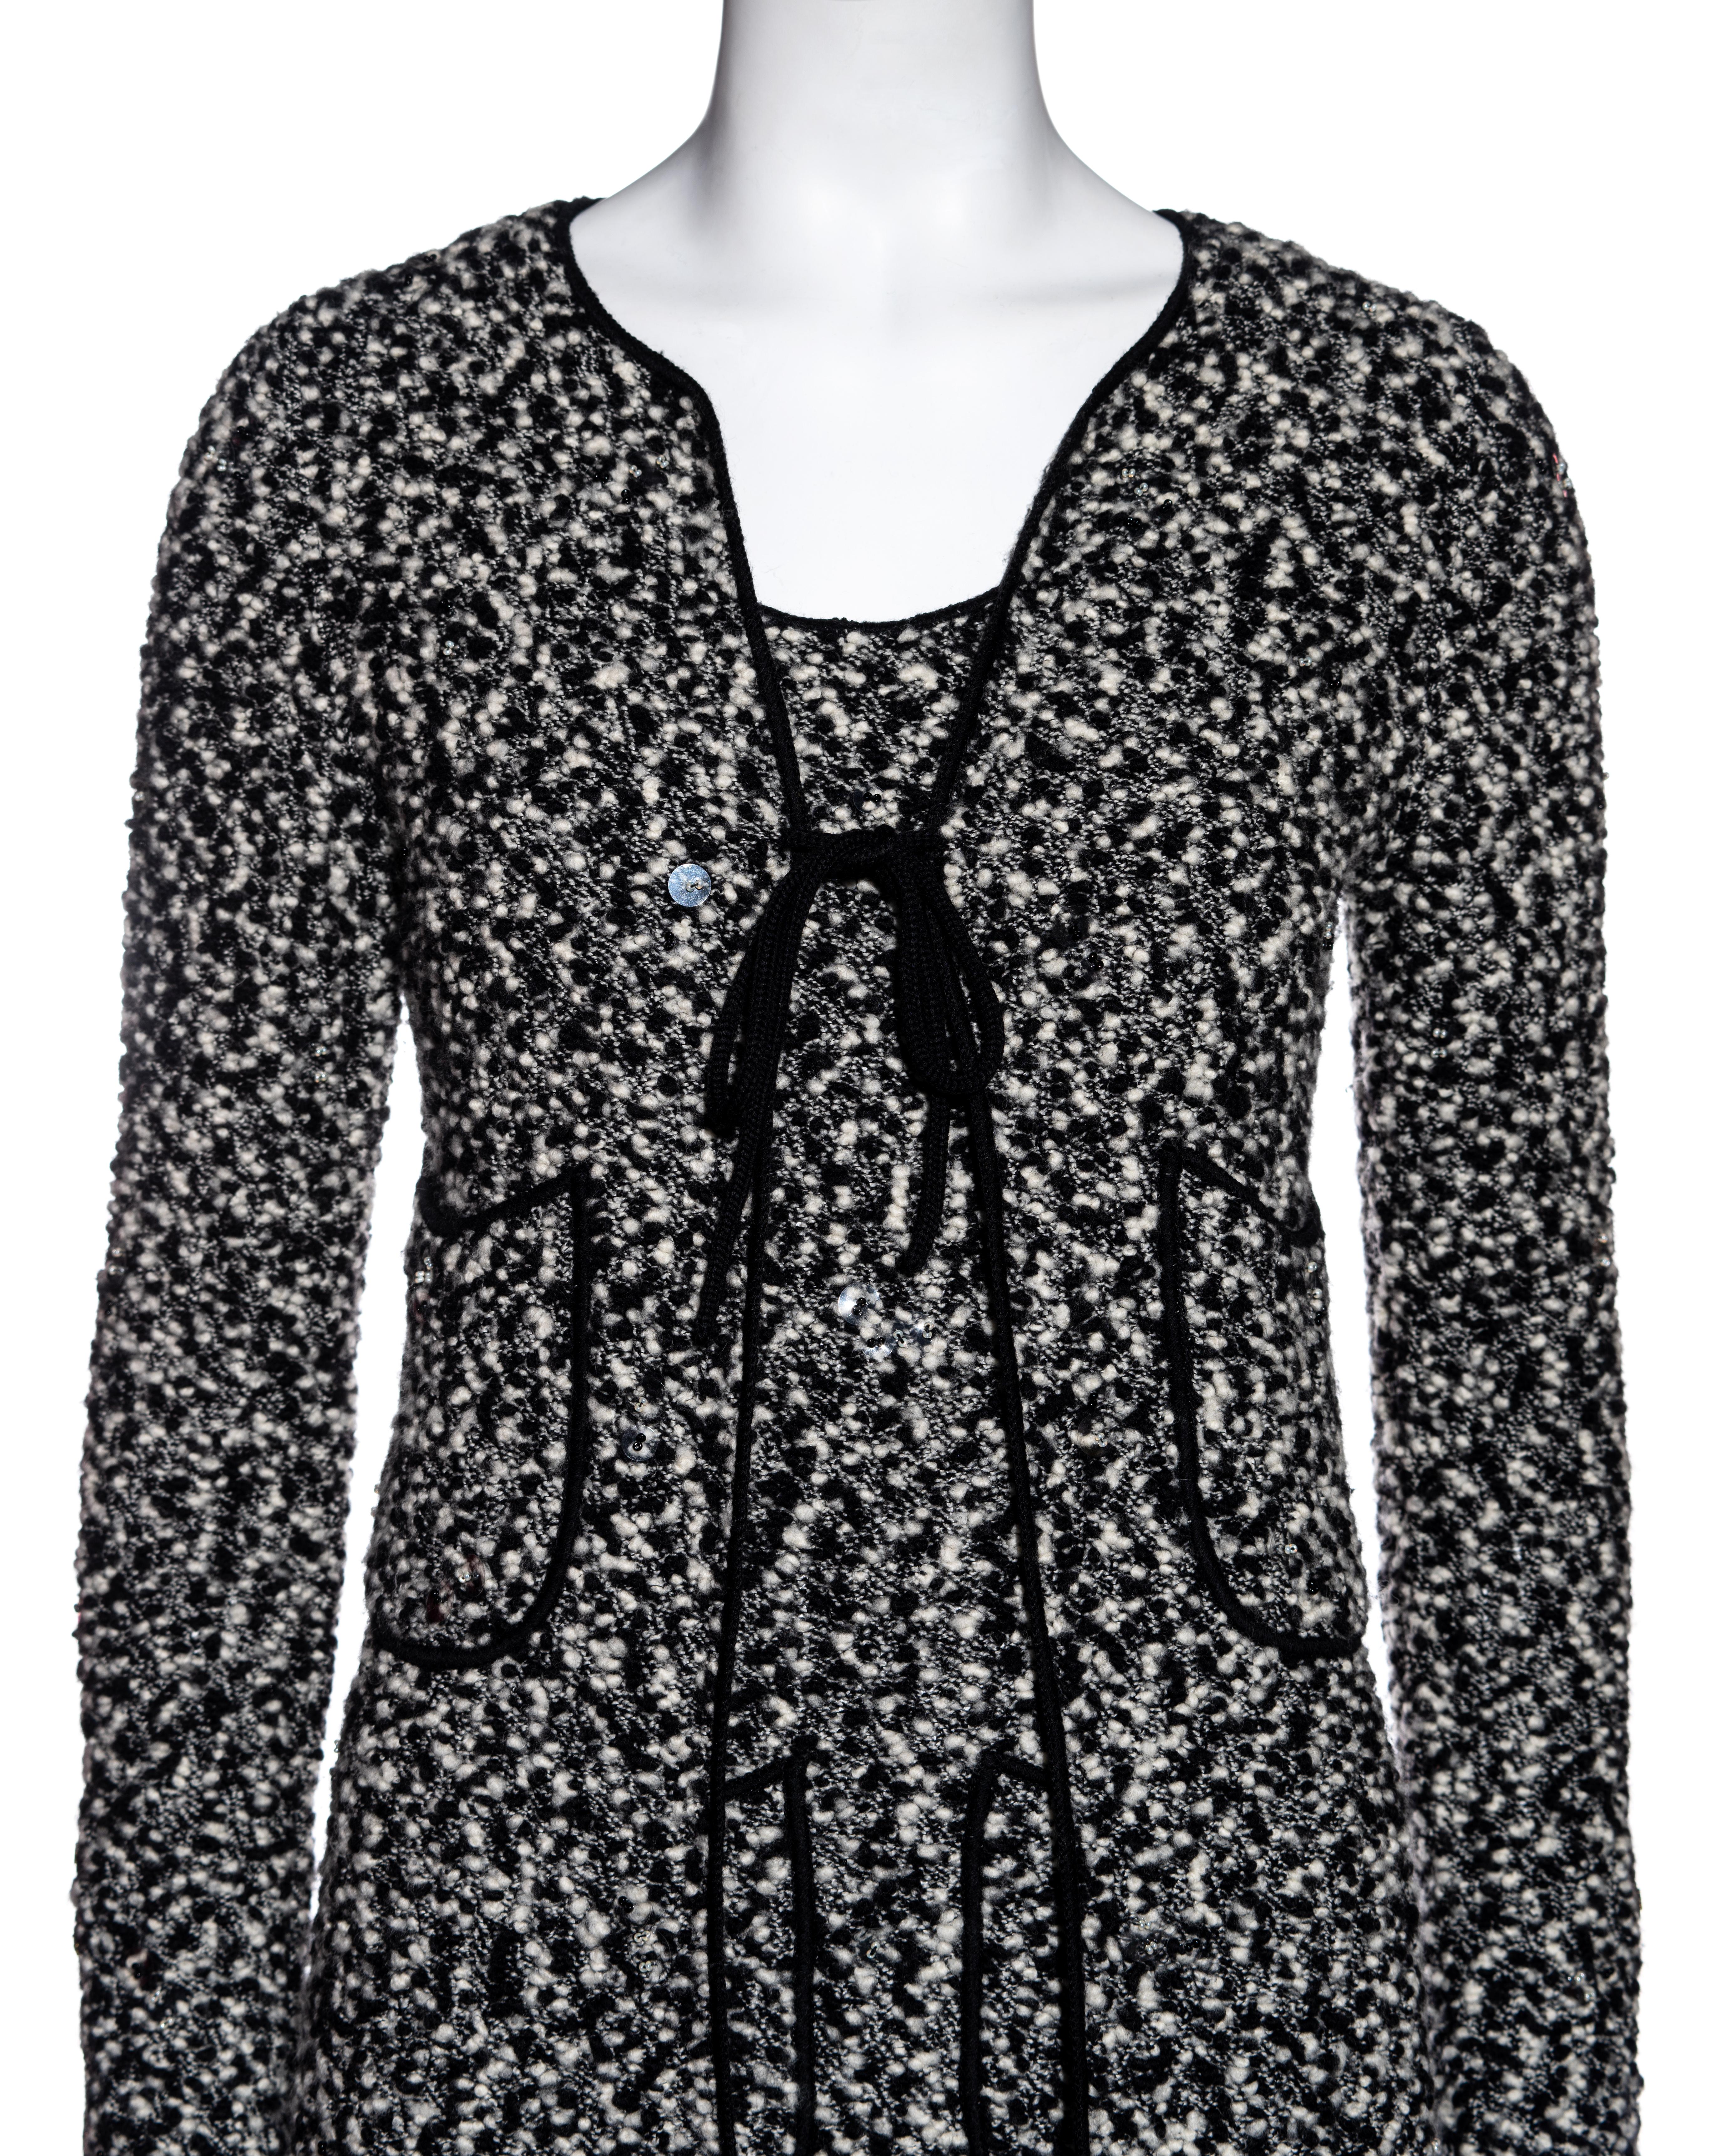 Chanel by Karl Lagerfeld bouclé wool mini dress and cardigan set, fw 1994 In Excellent Condition For Sale In London, GB